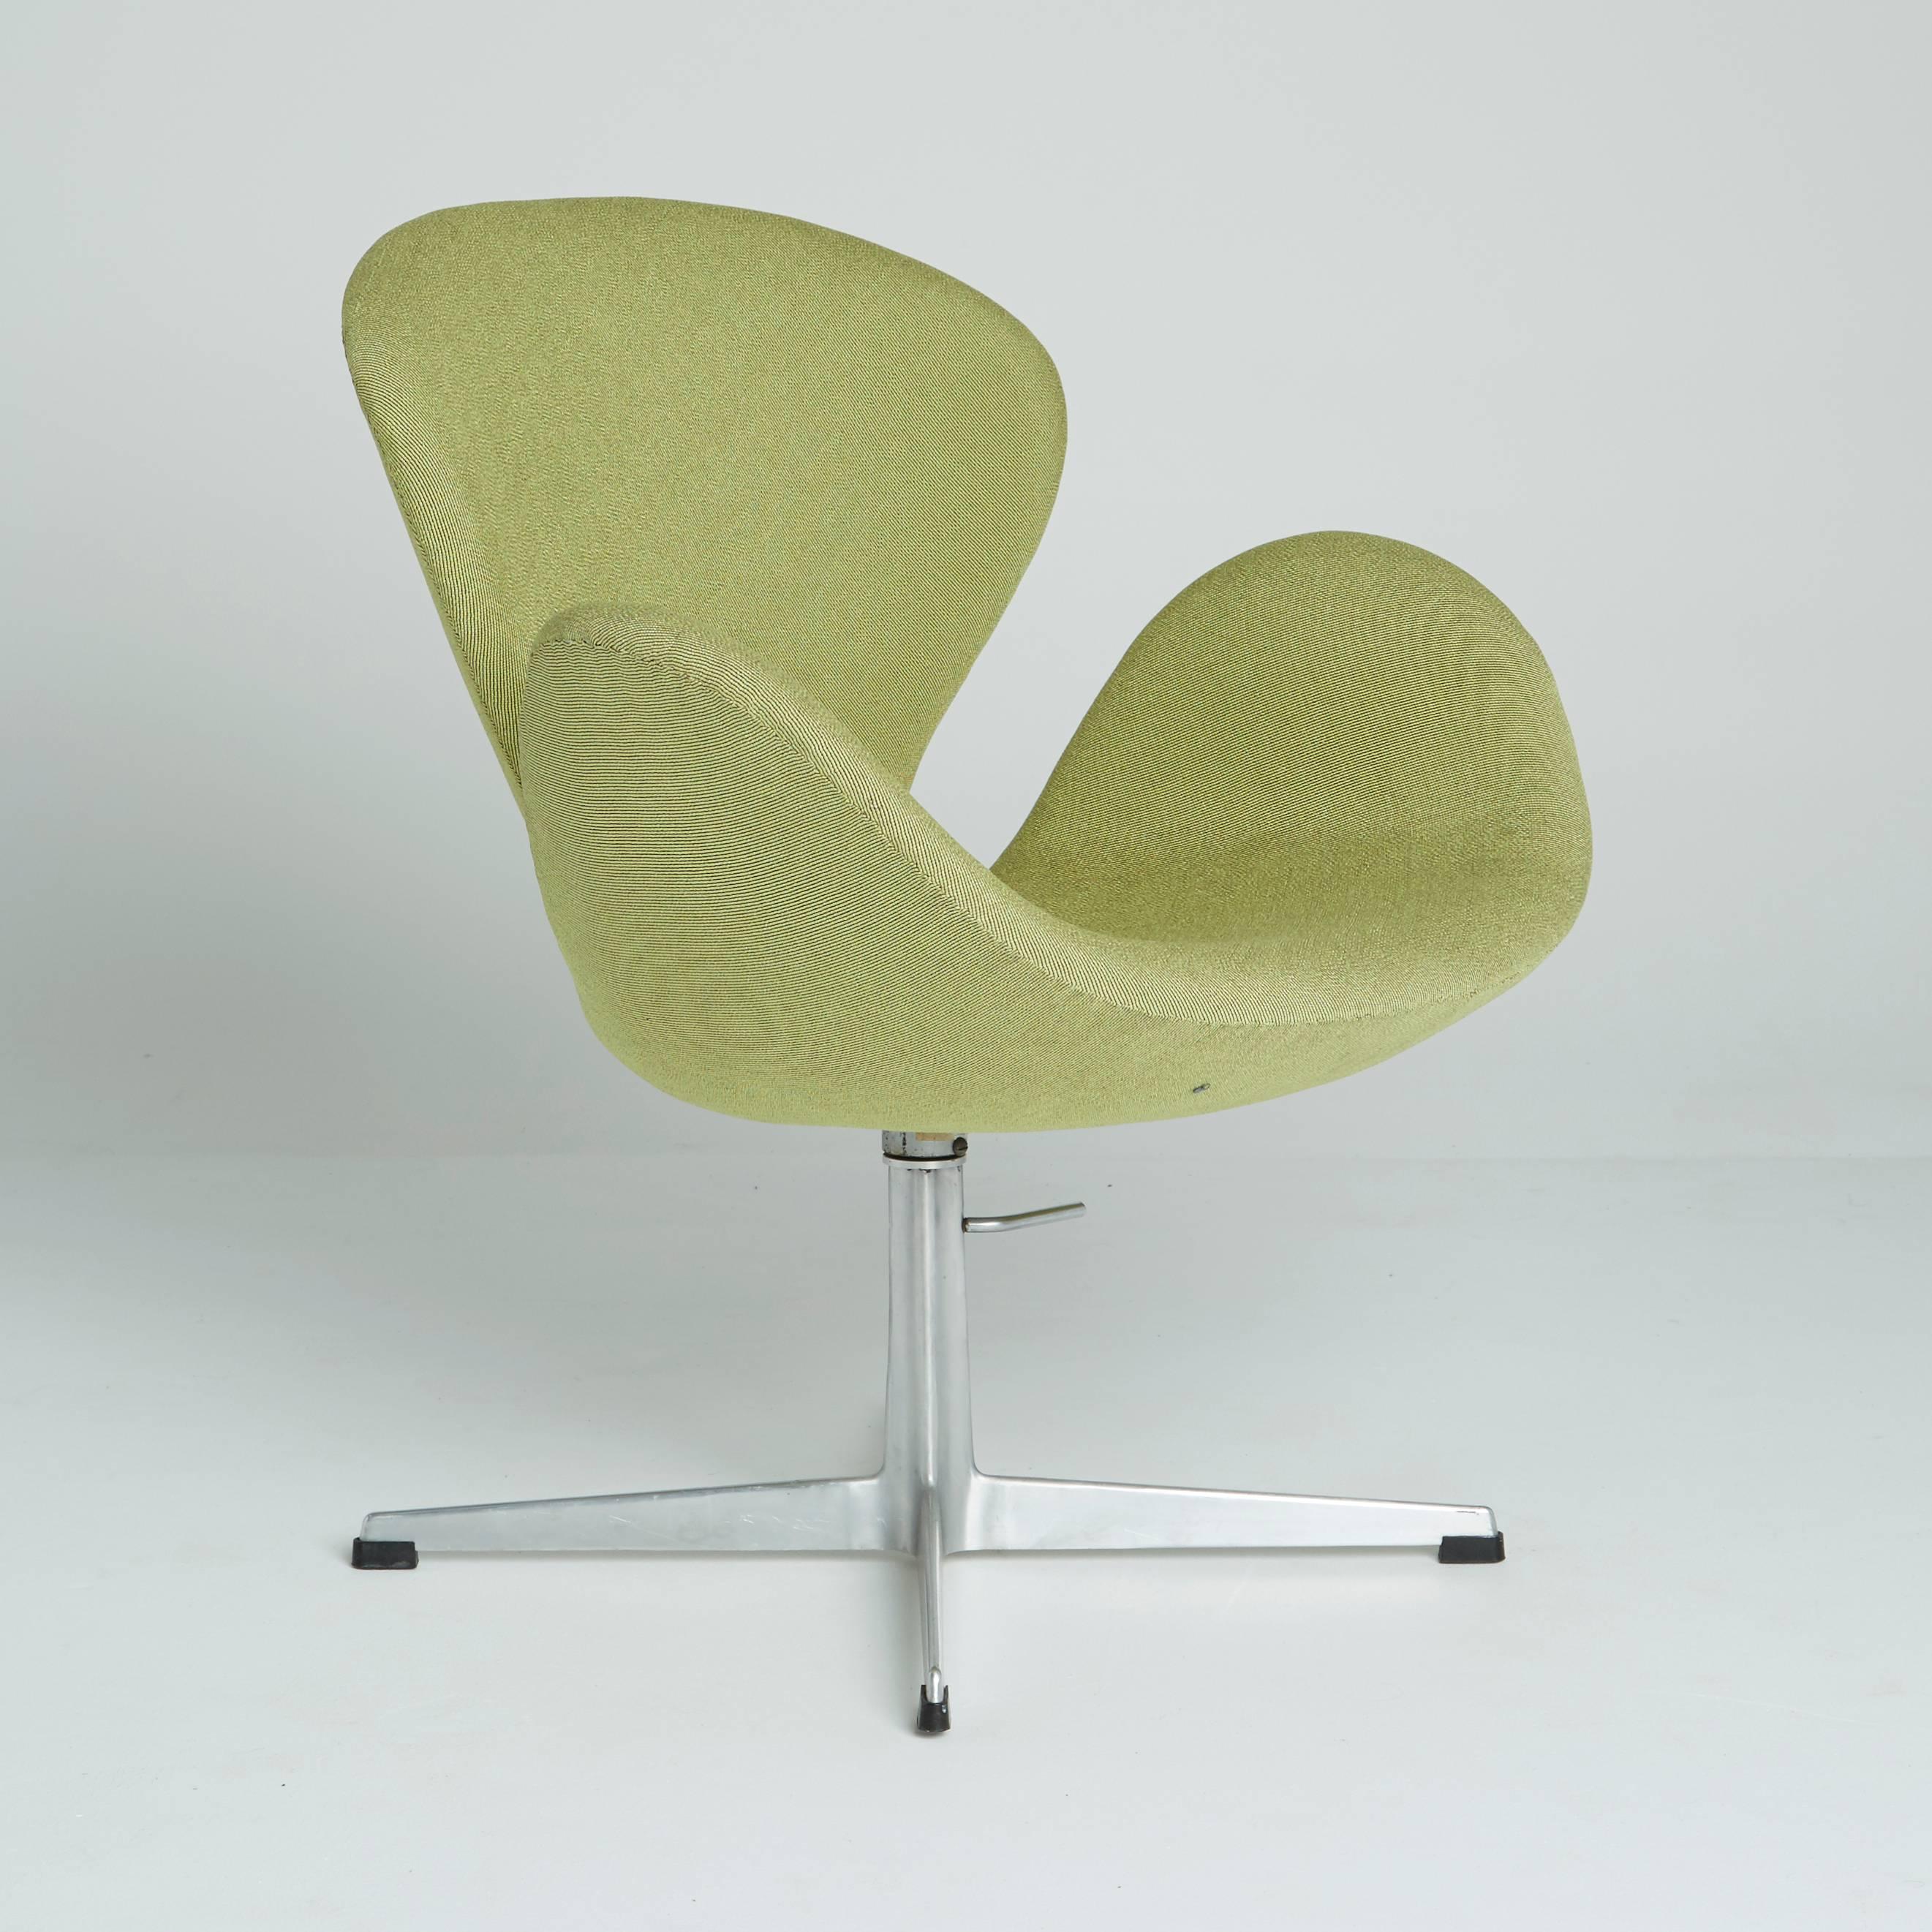 Mid-Century Modern Swan Chairs by Arne Jacobsen for Fritz Hansen, Circa 1964 Production